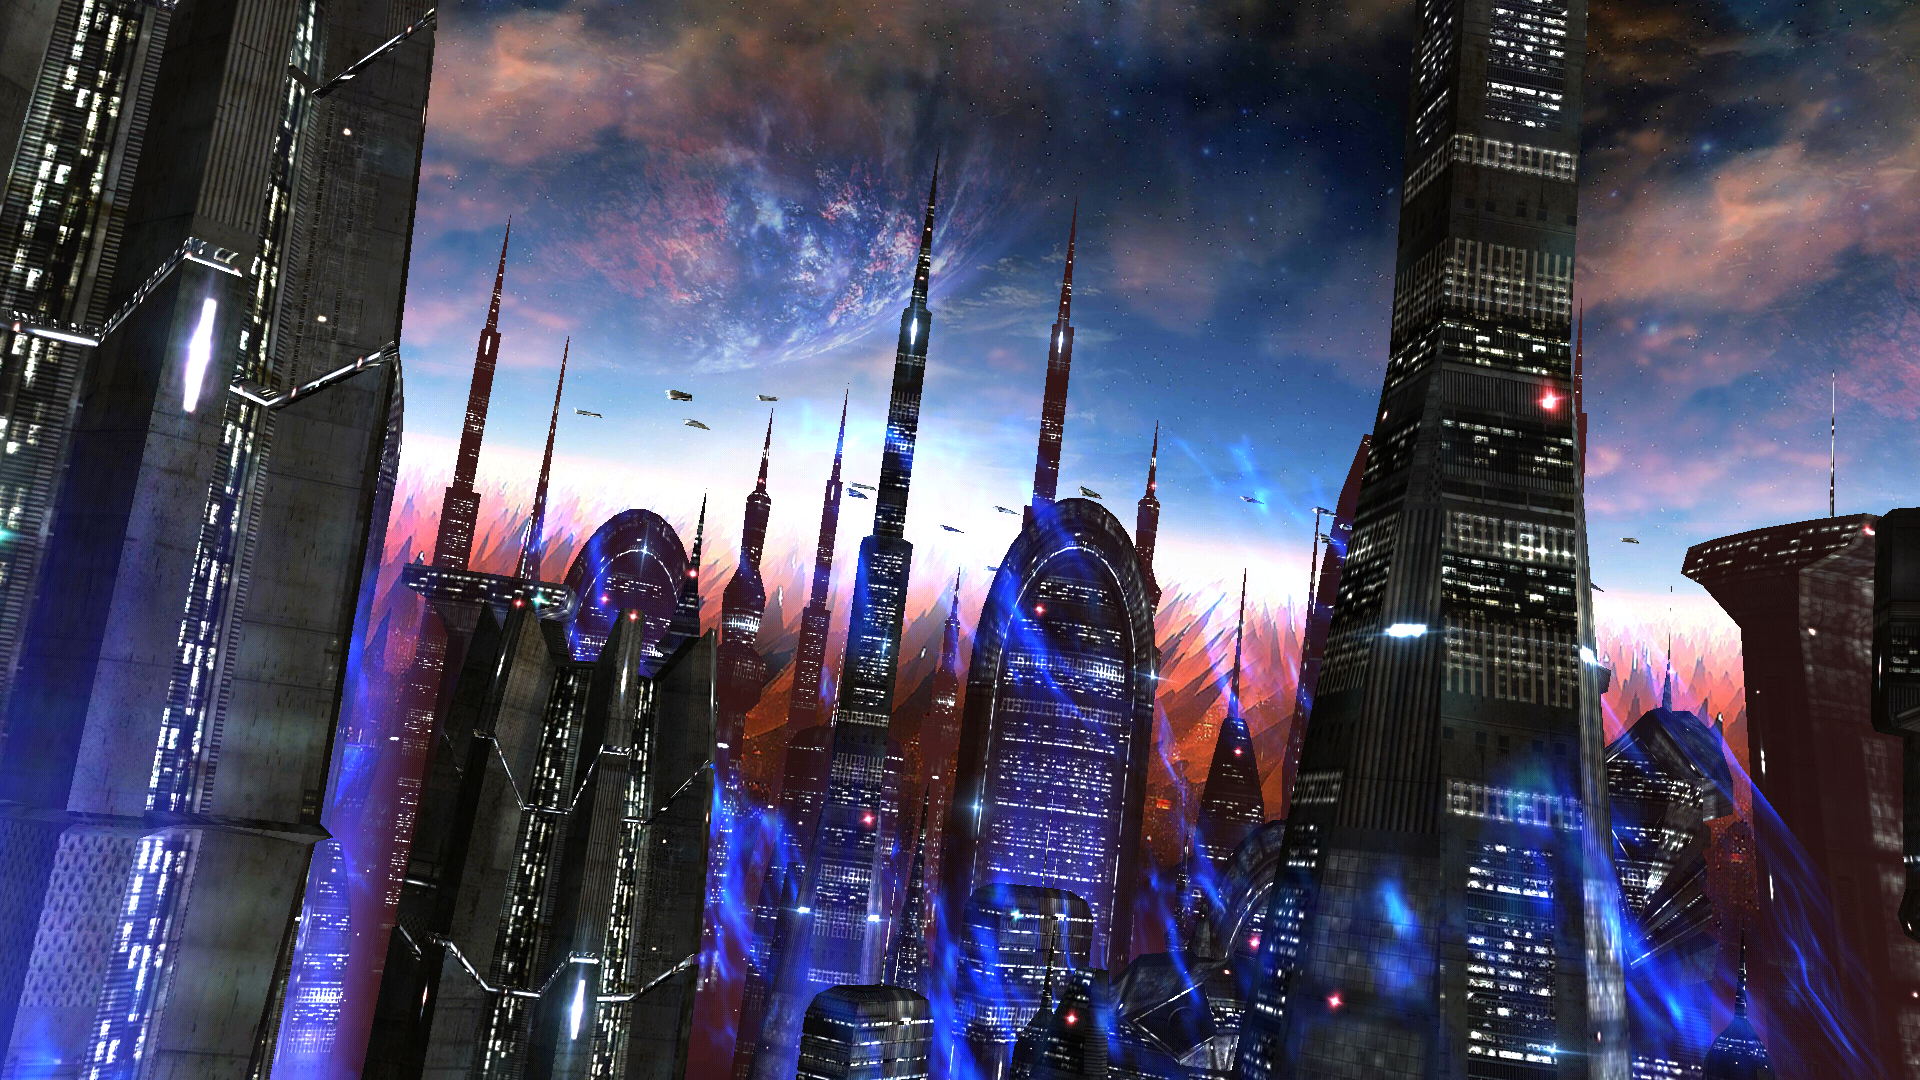 New App Maxelus Releases Space Colony, A Staggeringly Gorgeous Live Wallpaper